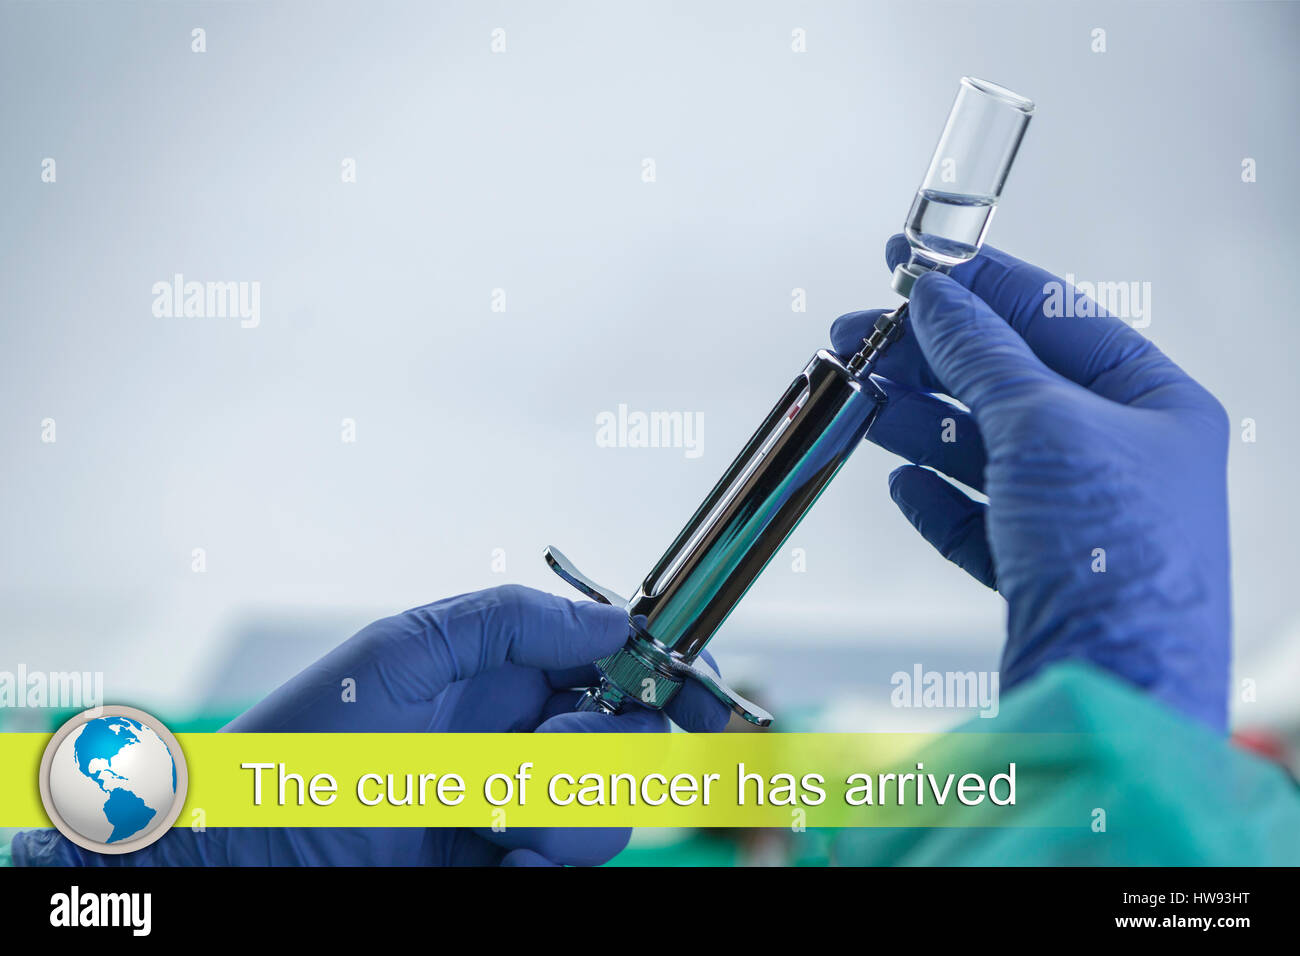 Digital composite of cancer news flash with medical imagery Stock Photo